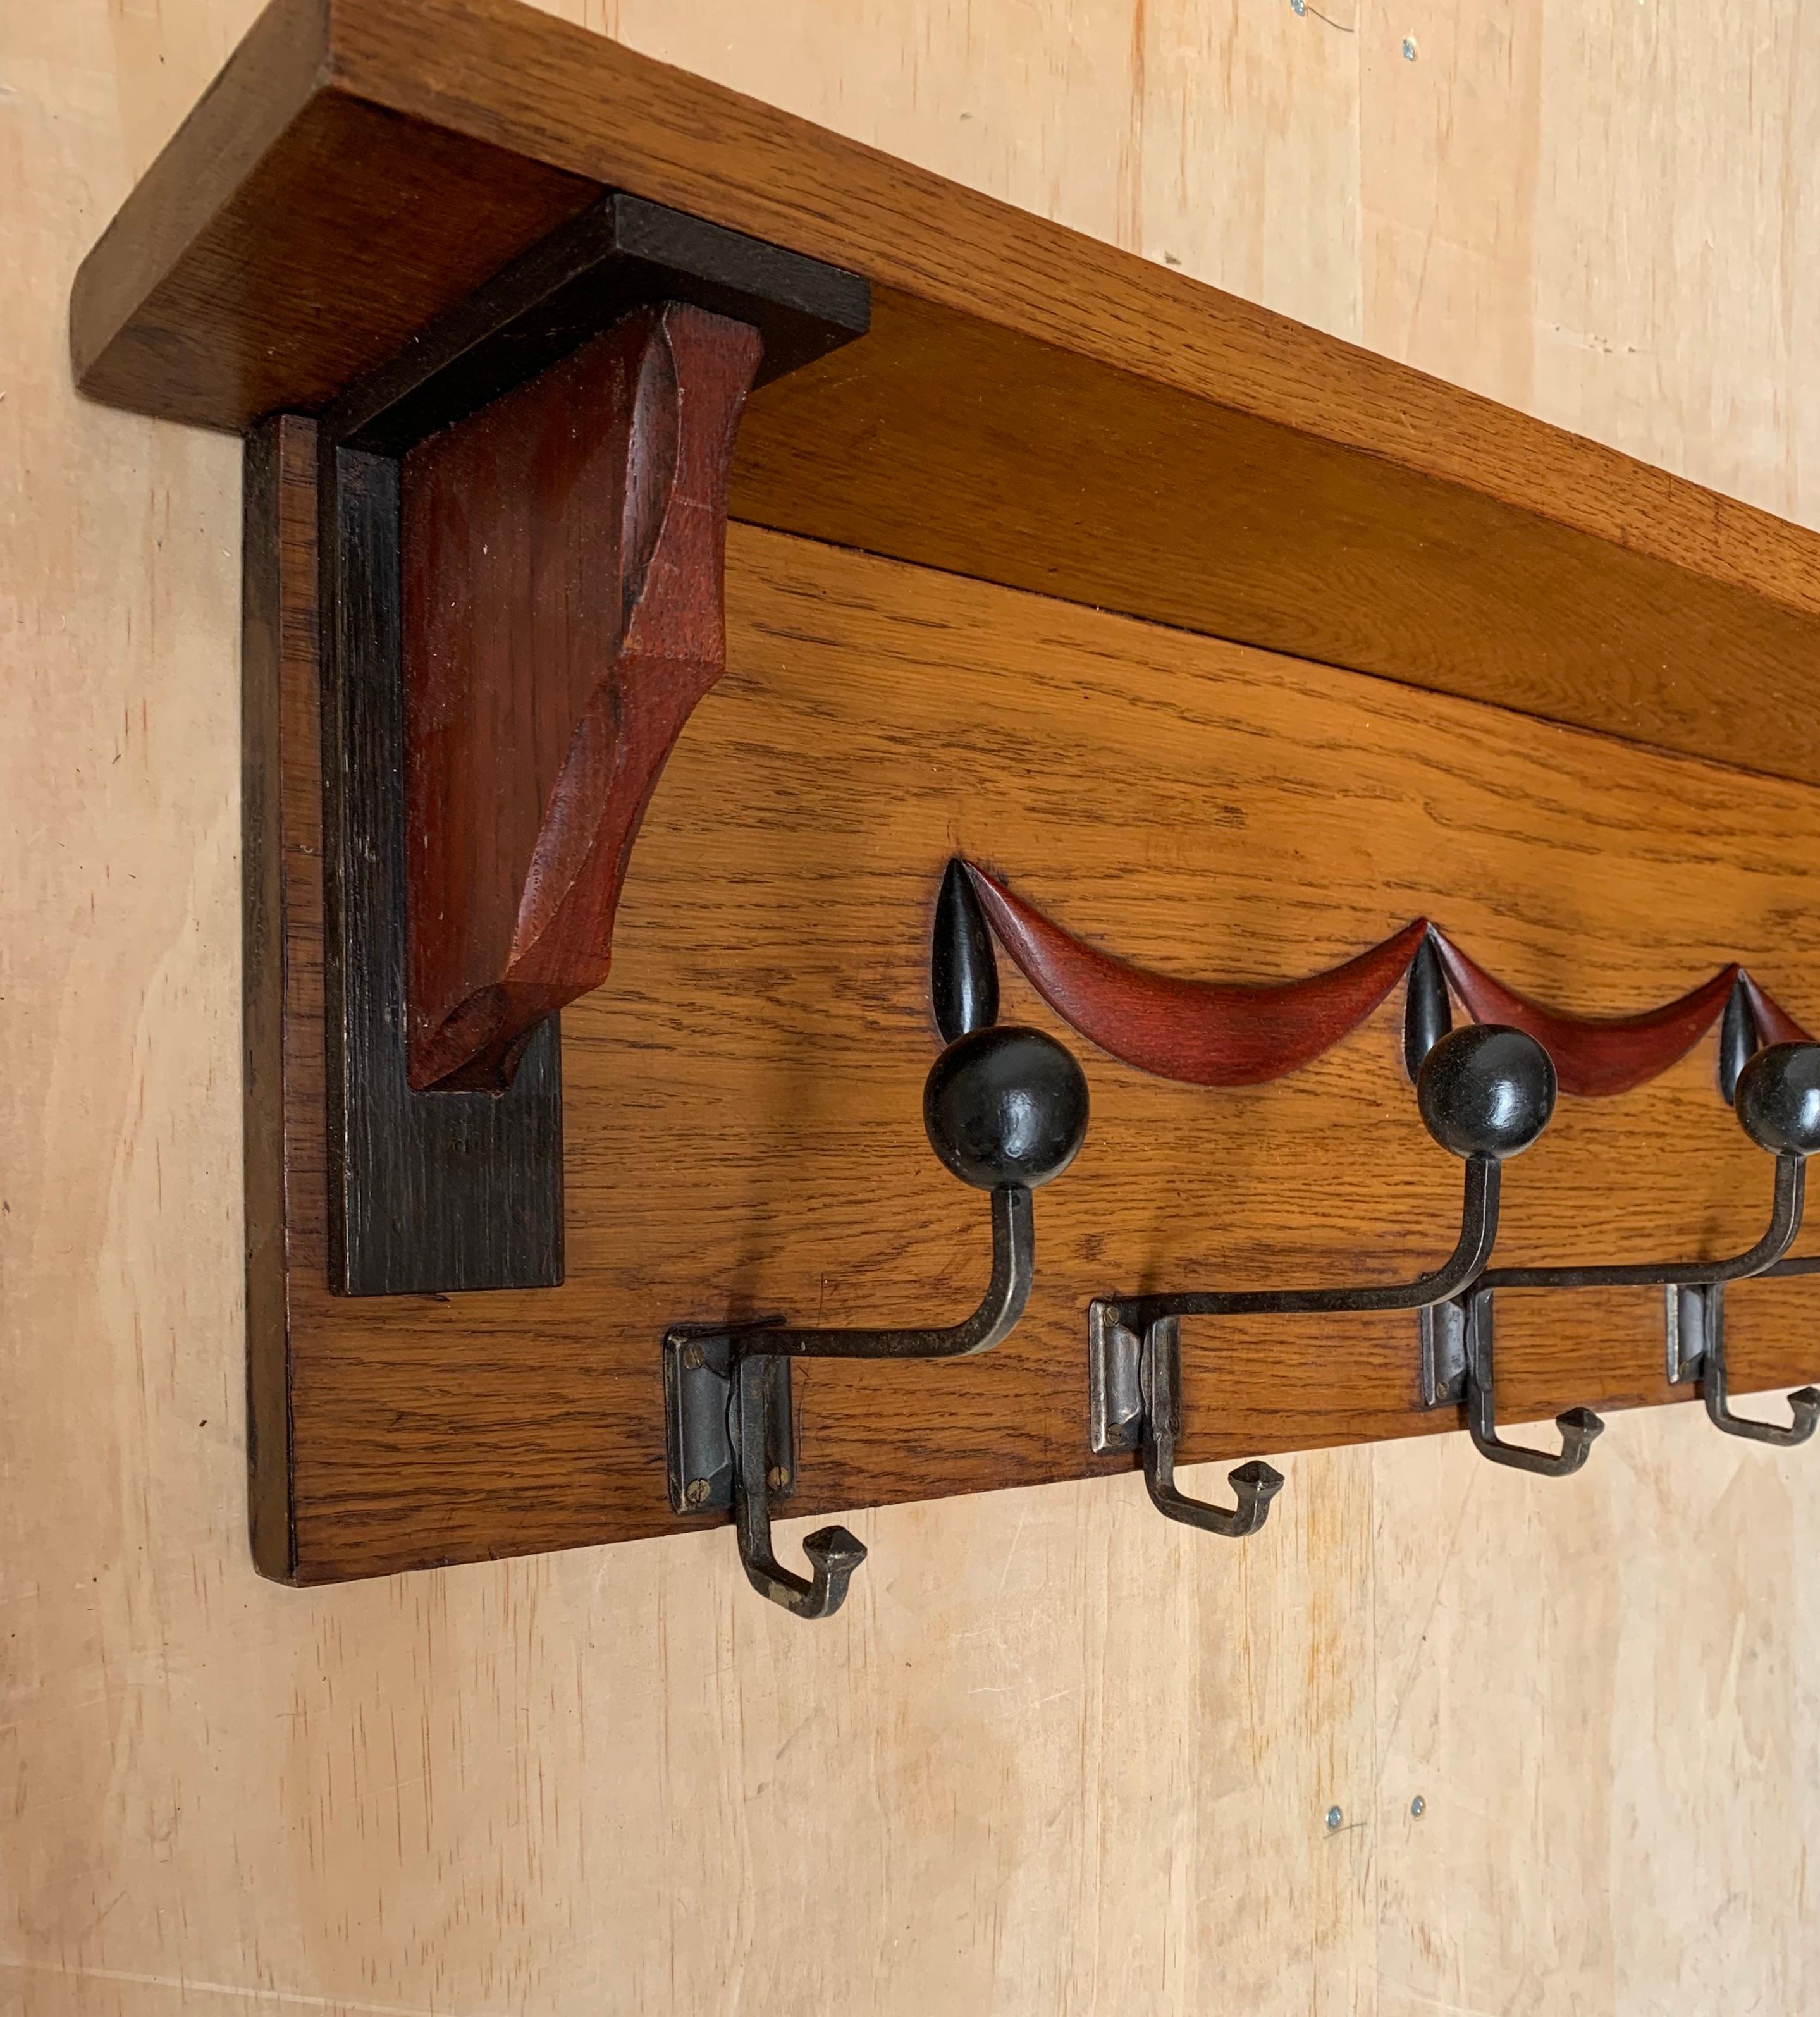 Rare and great looking wall coat-rack with a stylized theatre curtain motif.

This entry hall statement piece is made of various kinds of beautiful wood and it has a patina to die for. However, what makes this Arts and Crafts coat rack stand out